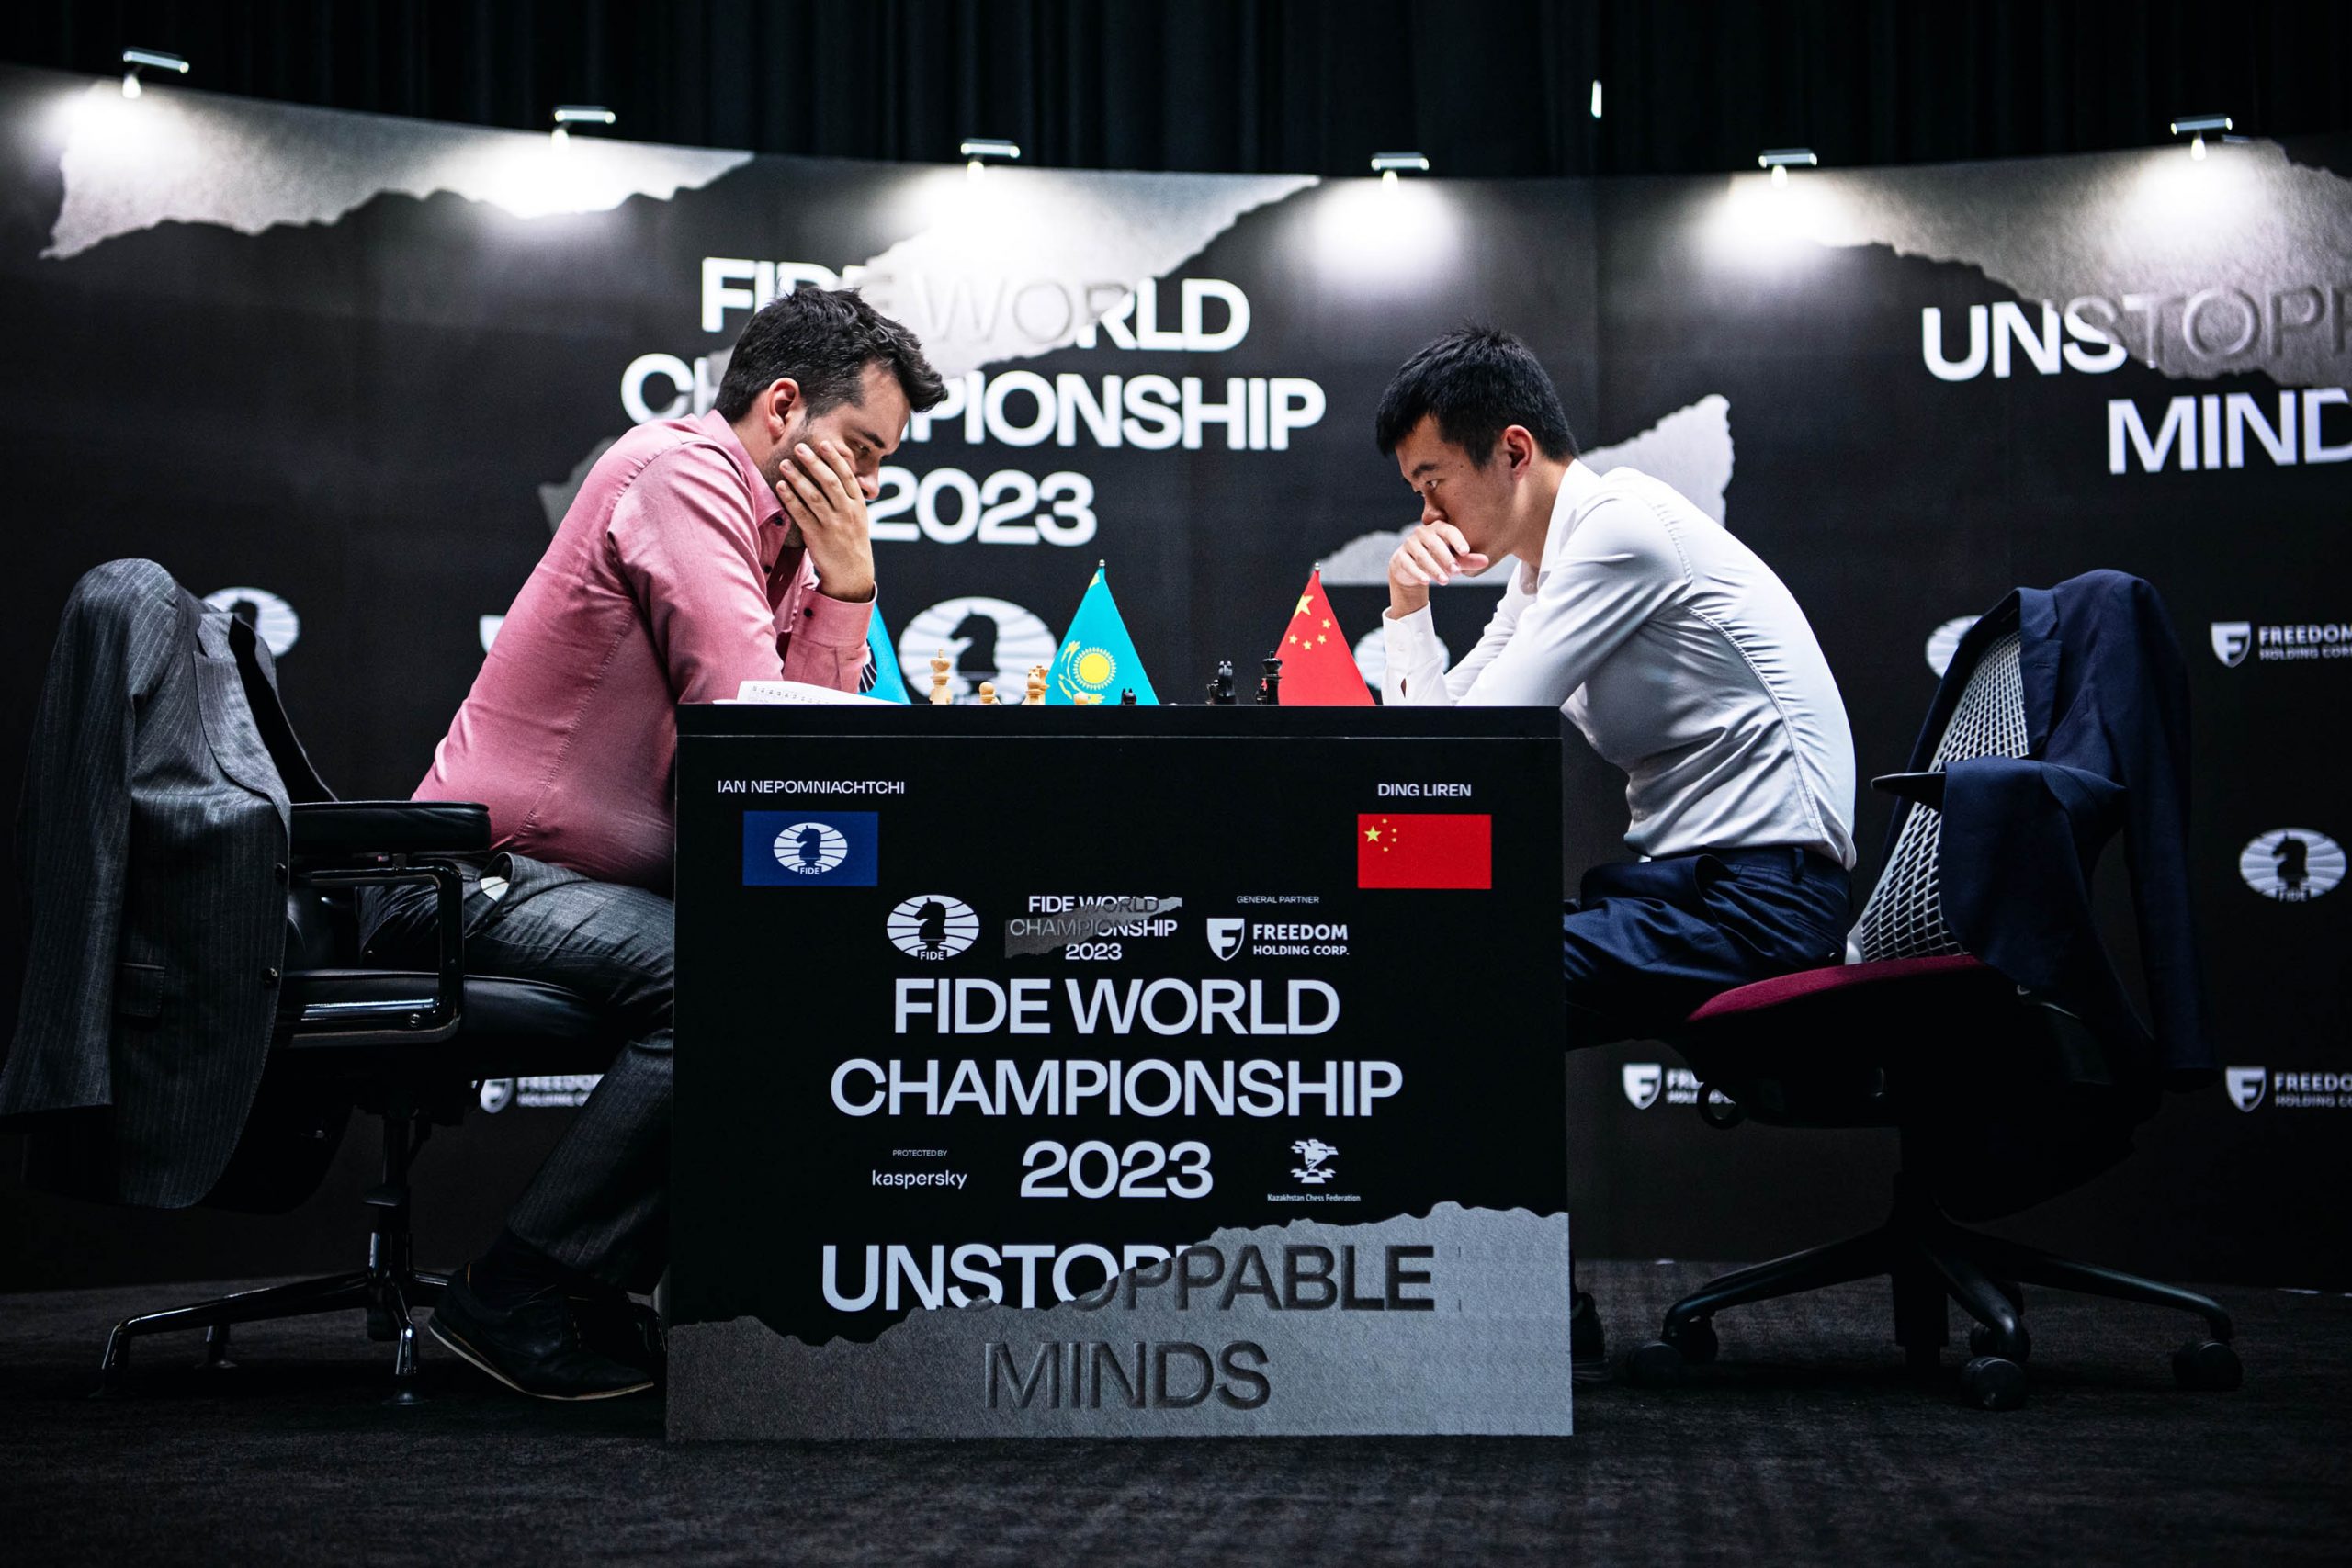 Chess-Psychological battle at heart of 'unusual' world championship match